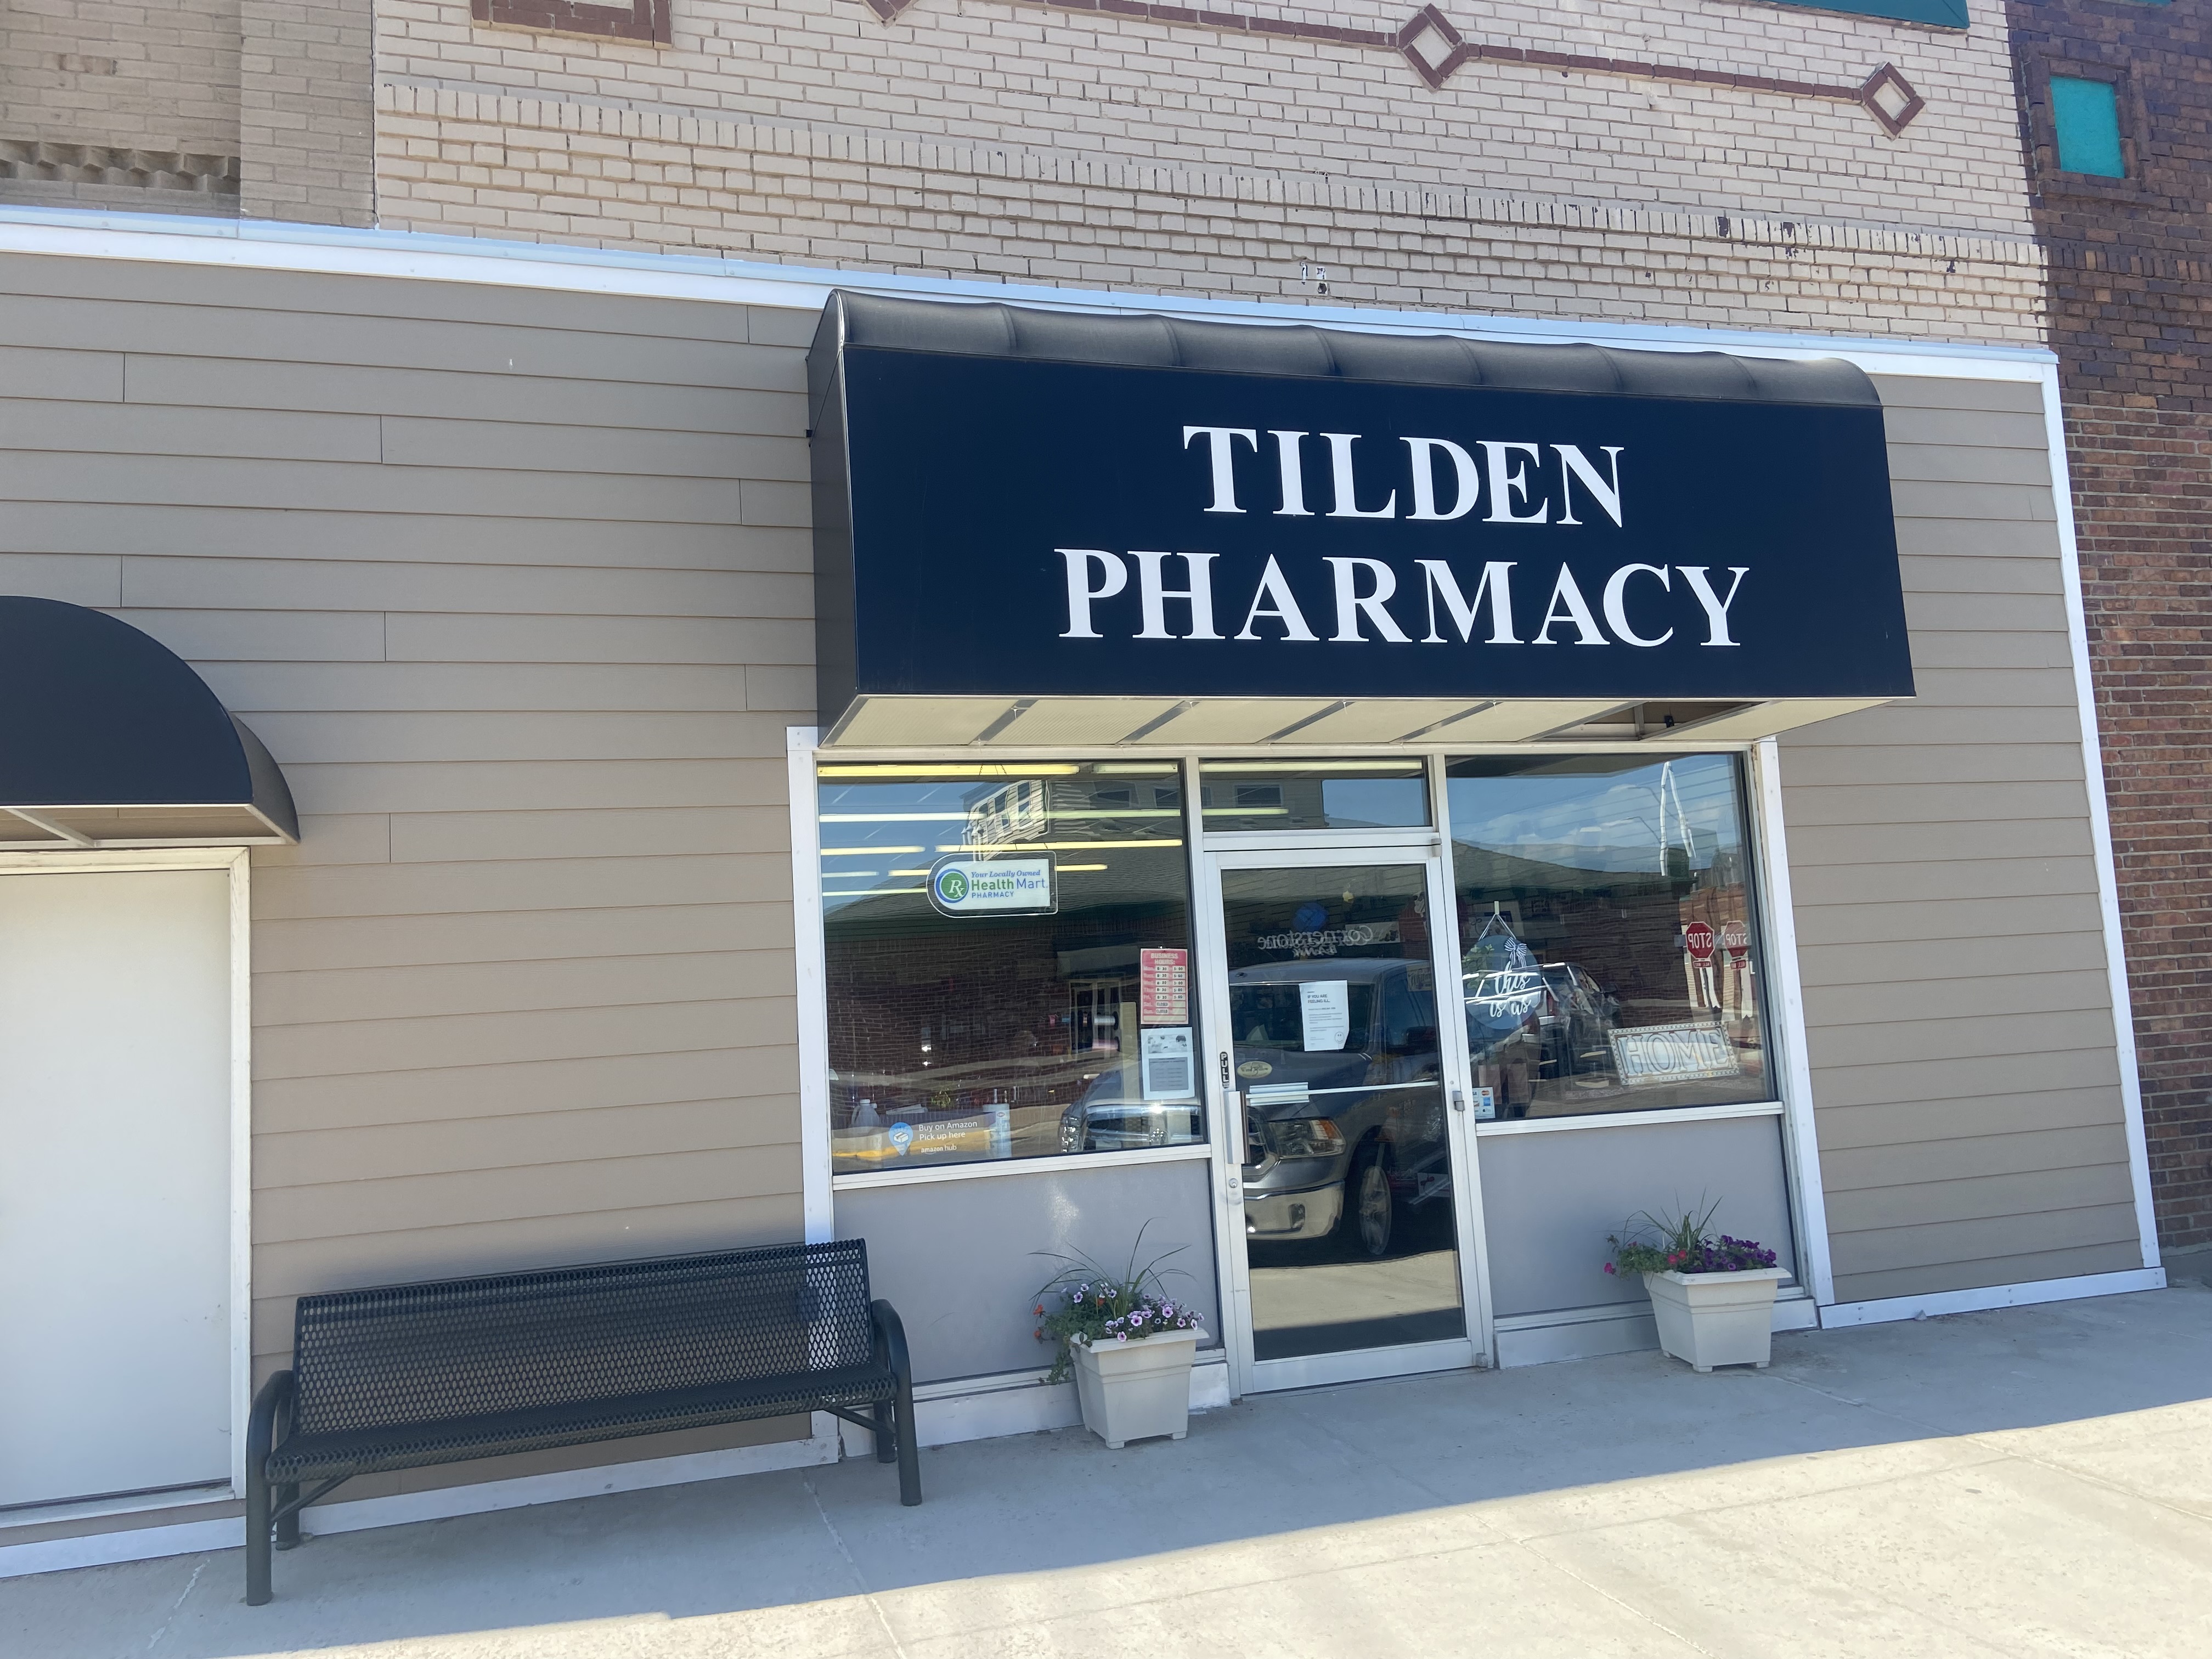 Tilden Pharmacy featured business photo